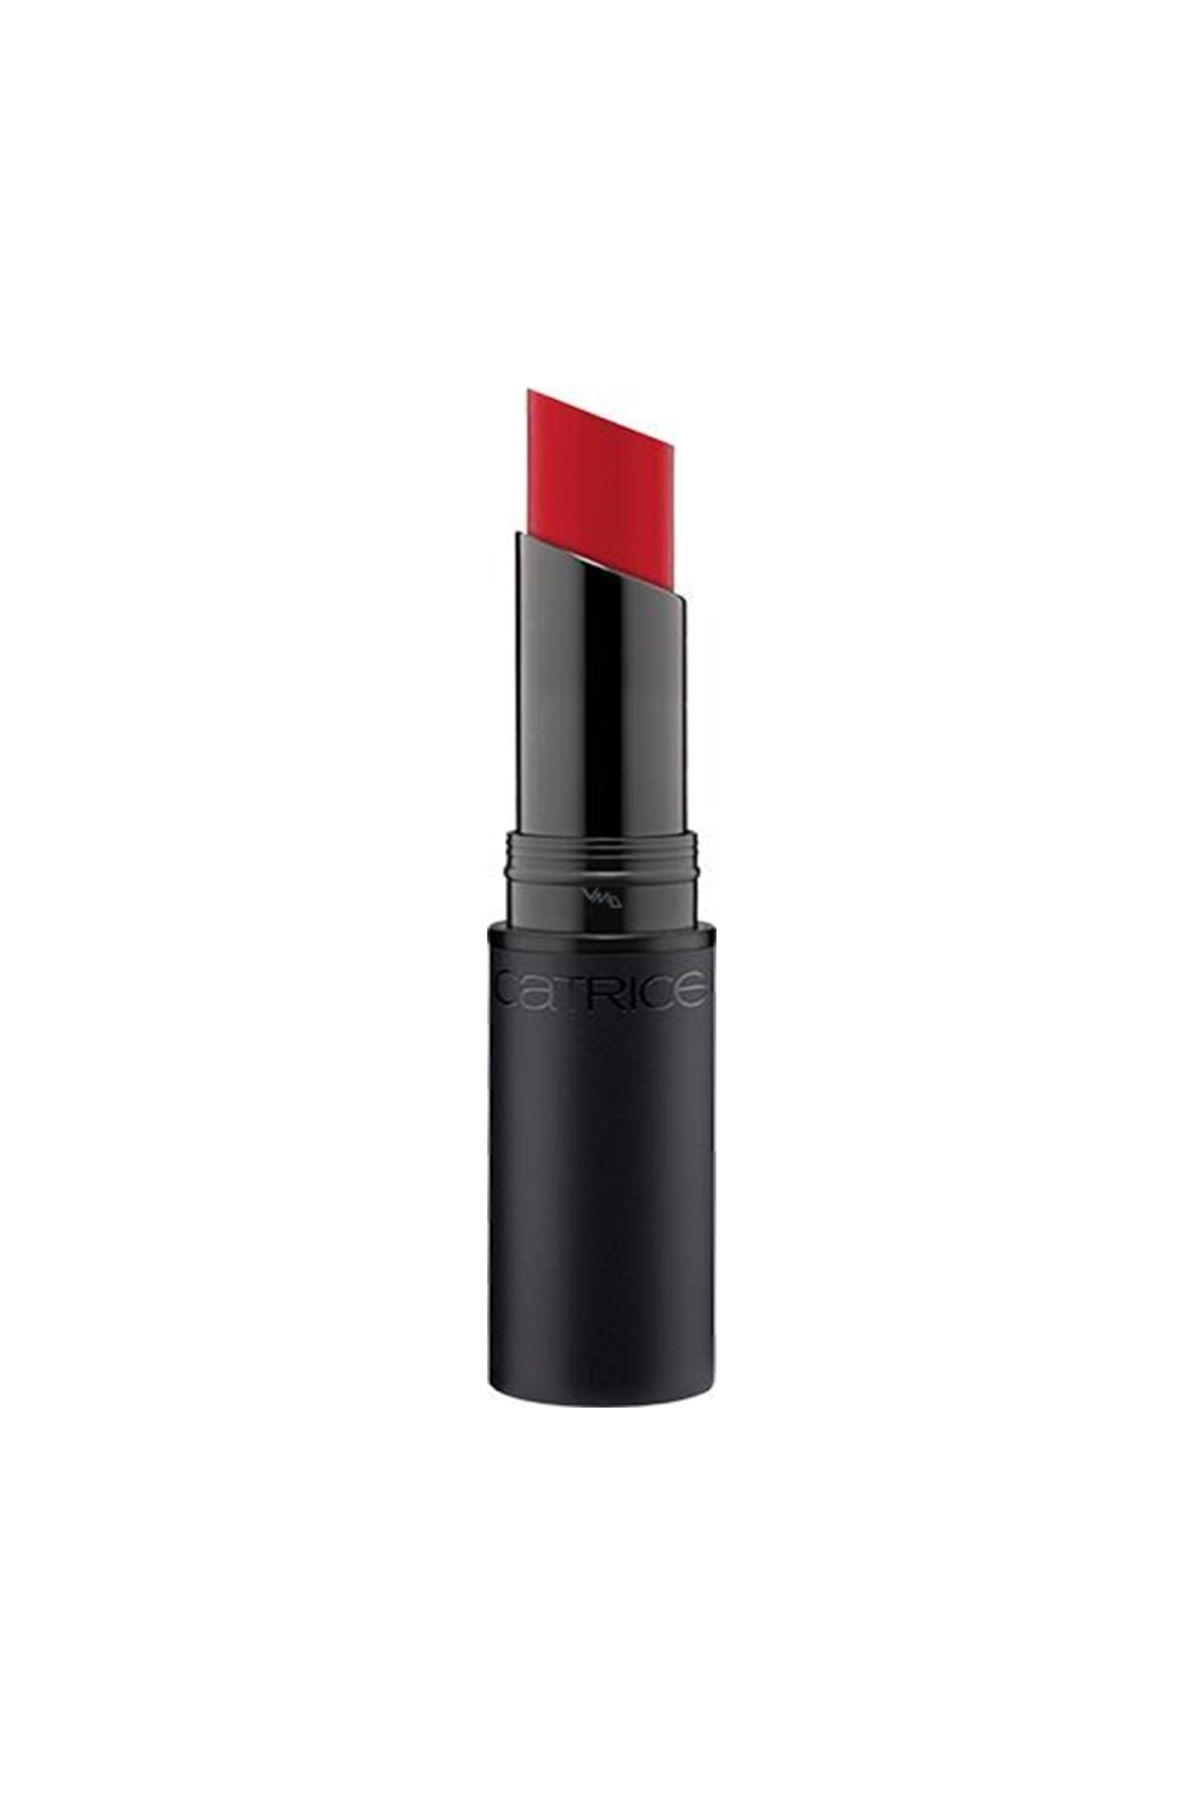 Catrice Ultimate Stay Lipstick Lipstick 140 Behind The Red